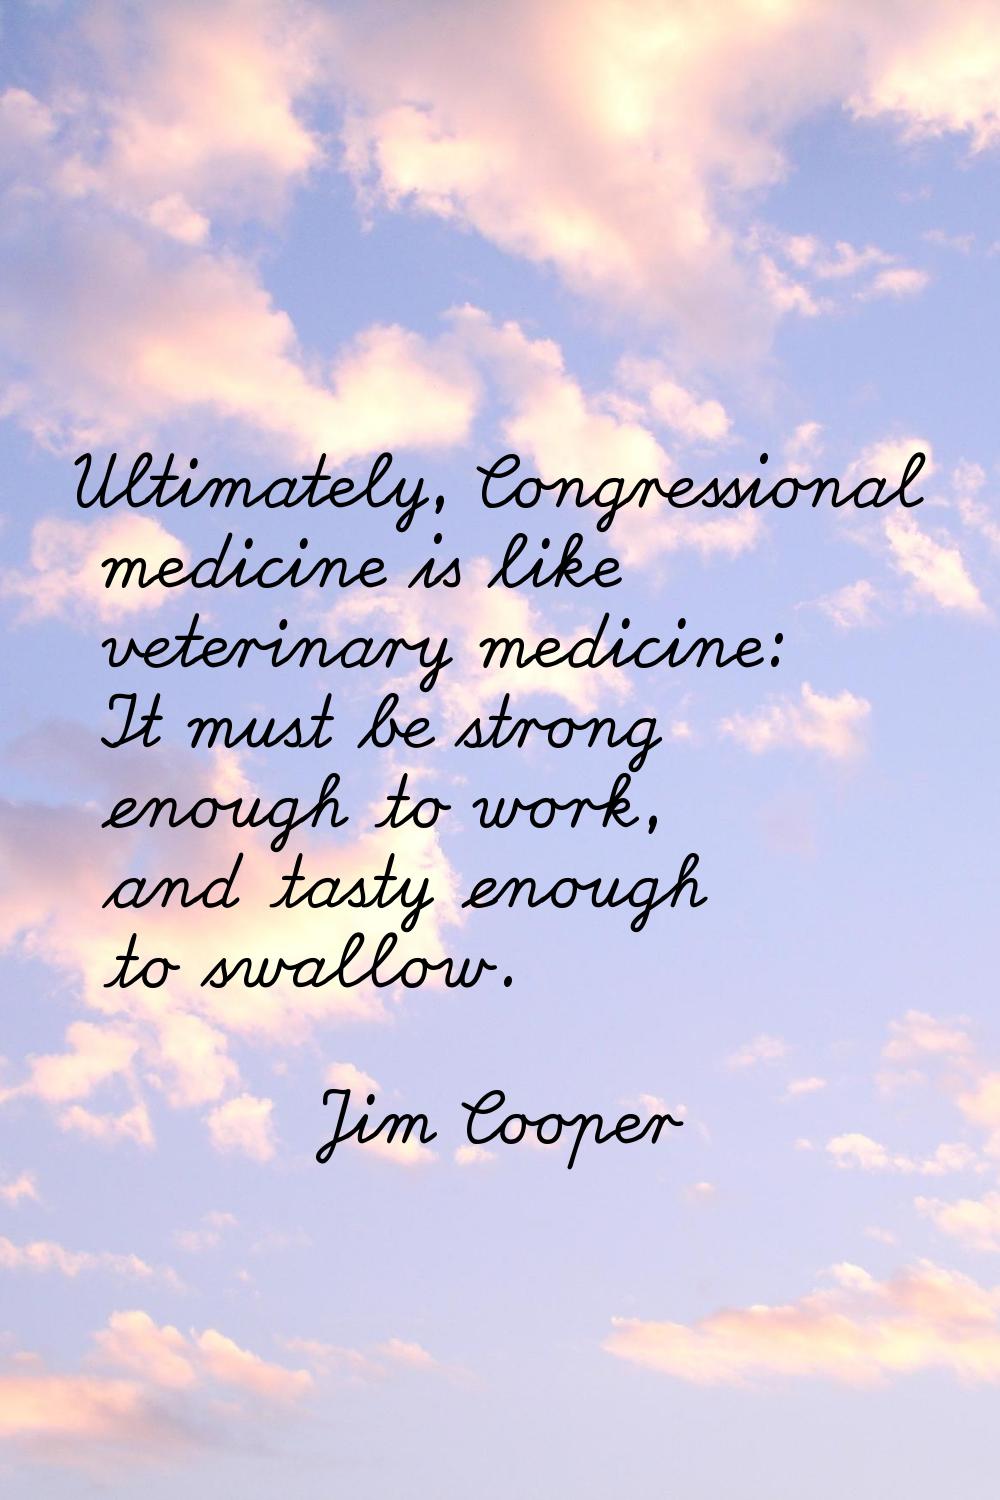 Ultimately, Congressional medicine is like veterinary medicine: It must be strong enough to work, a